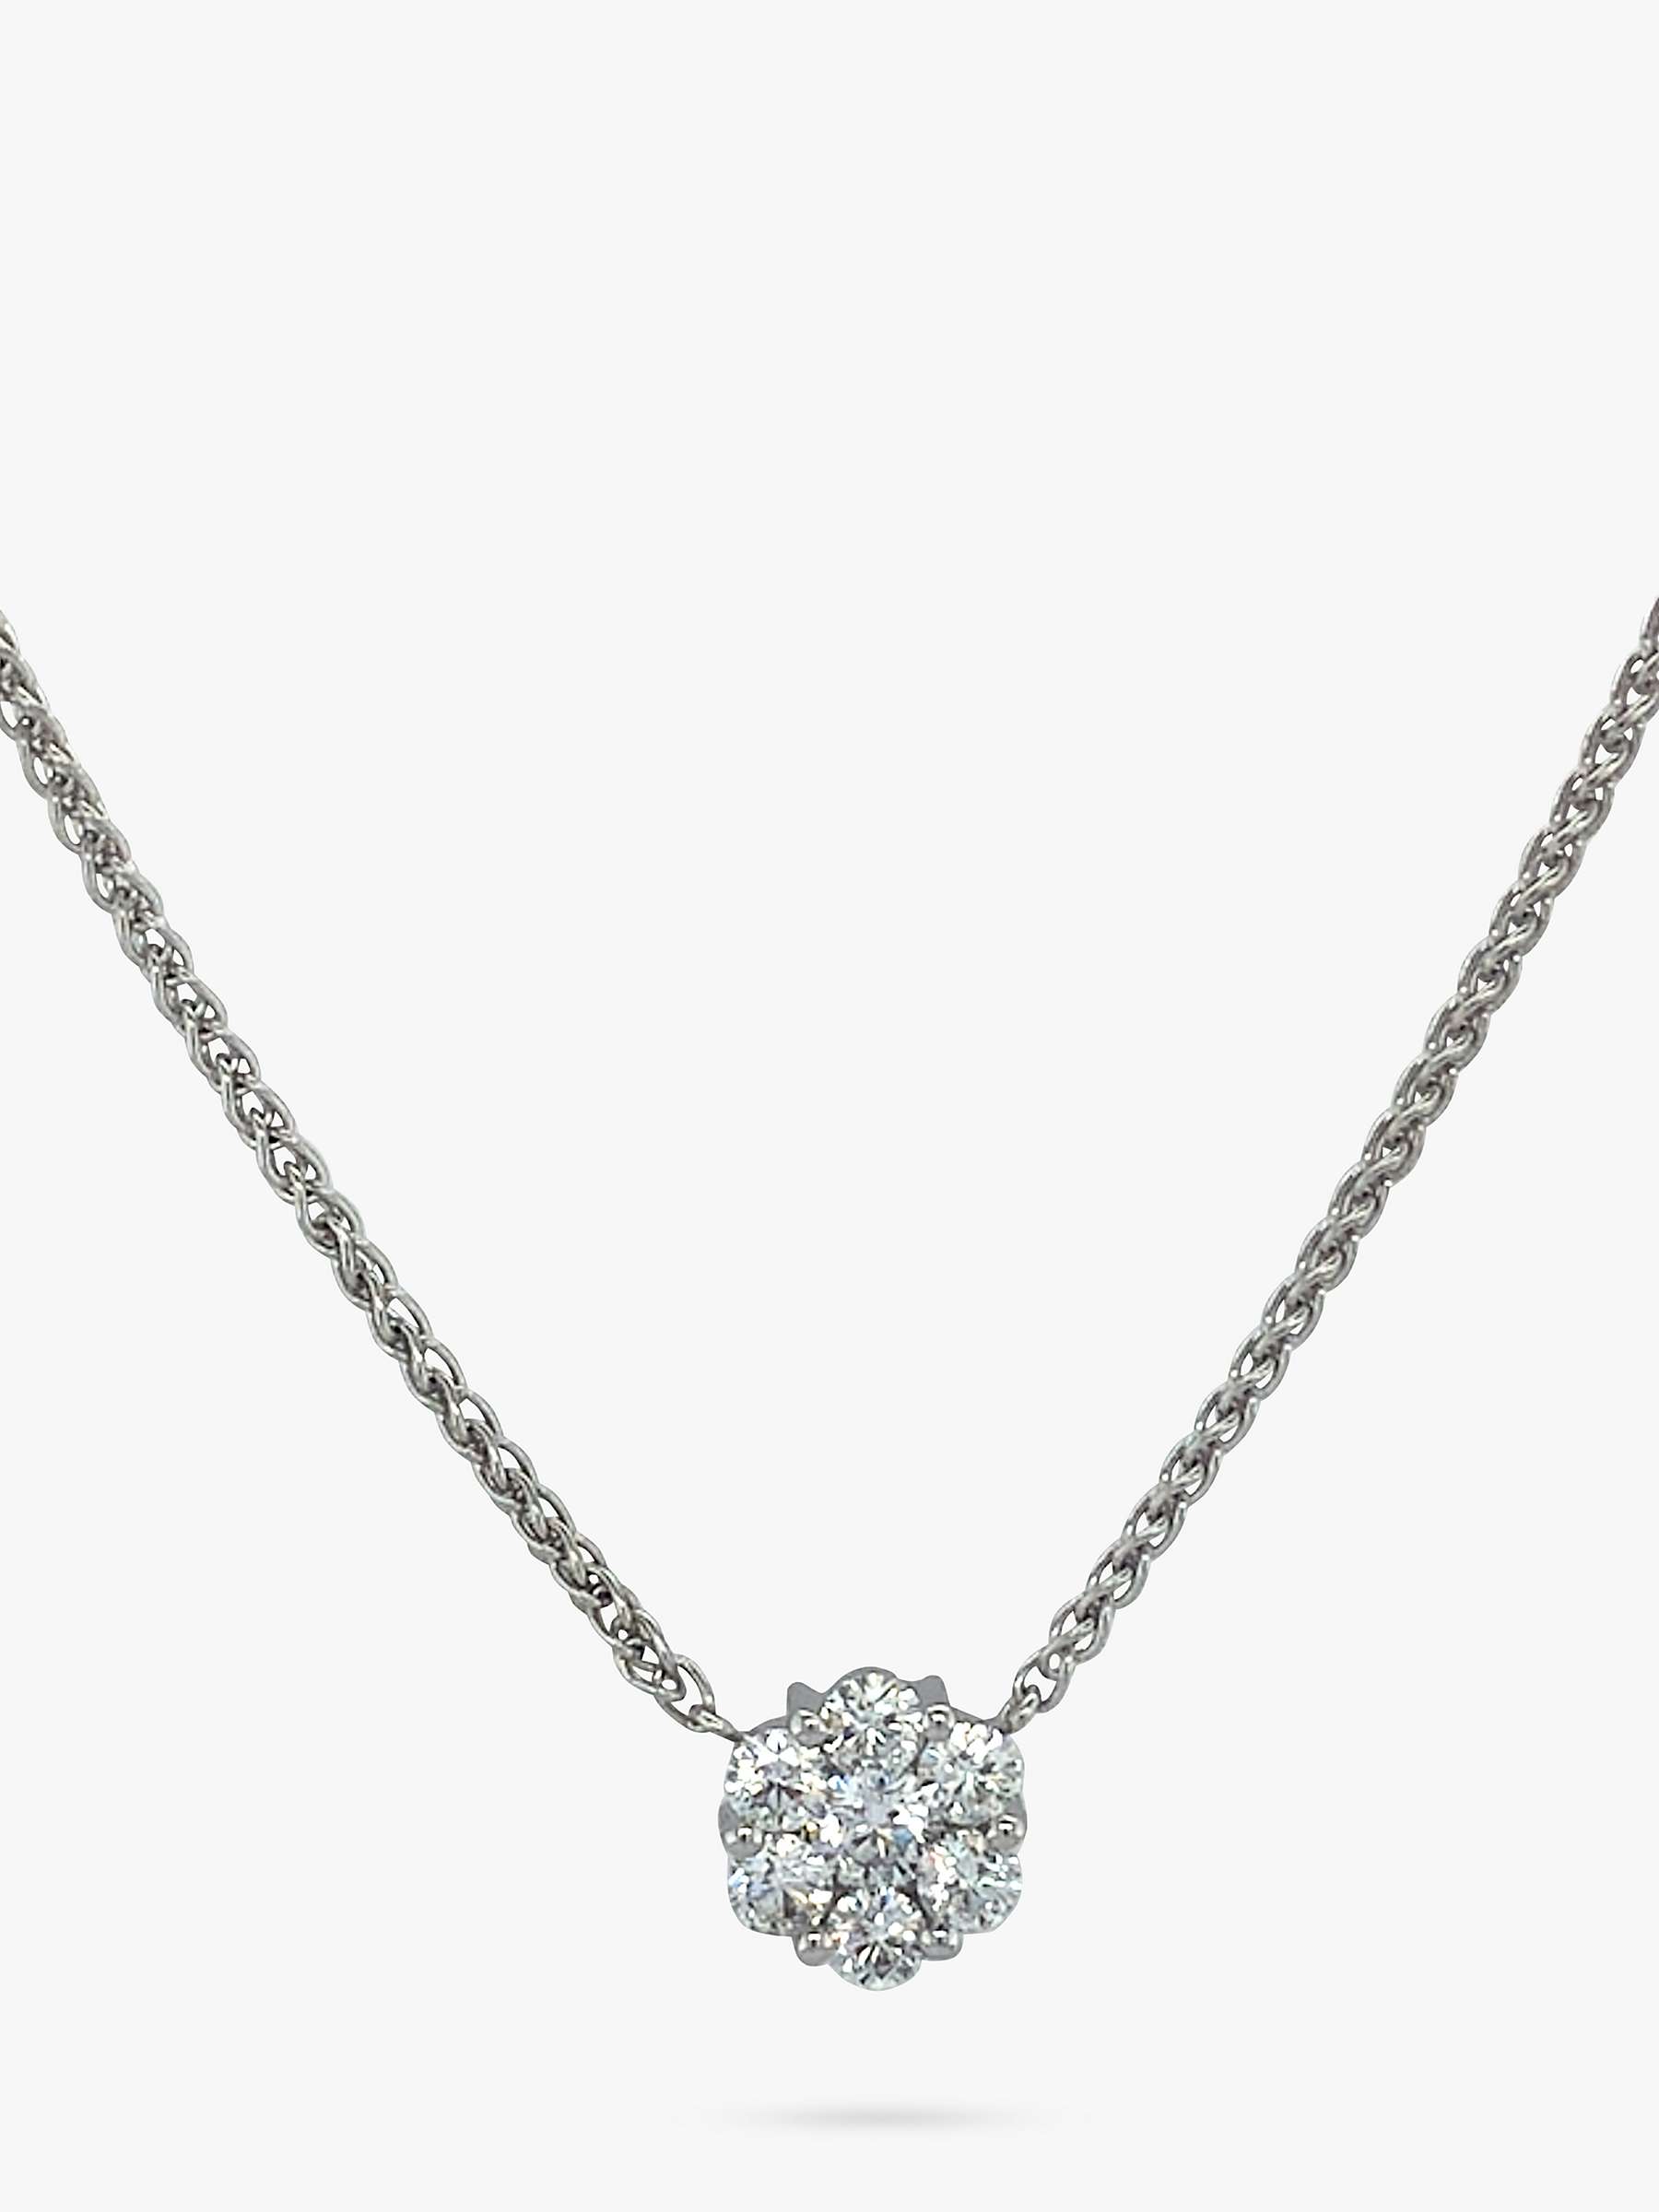 Buy Vintage Fine Jewellery Second Hand 14ct White Gold Diamond Cluster Pendant Necklace Online at johnlewis.com